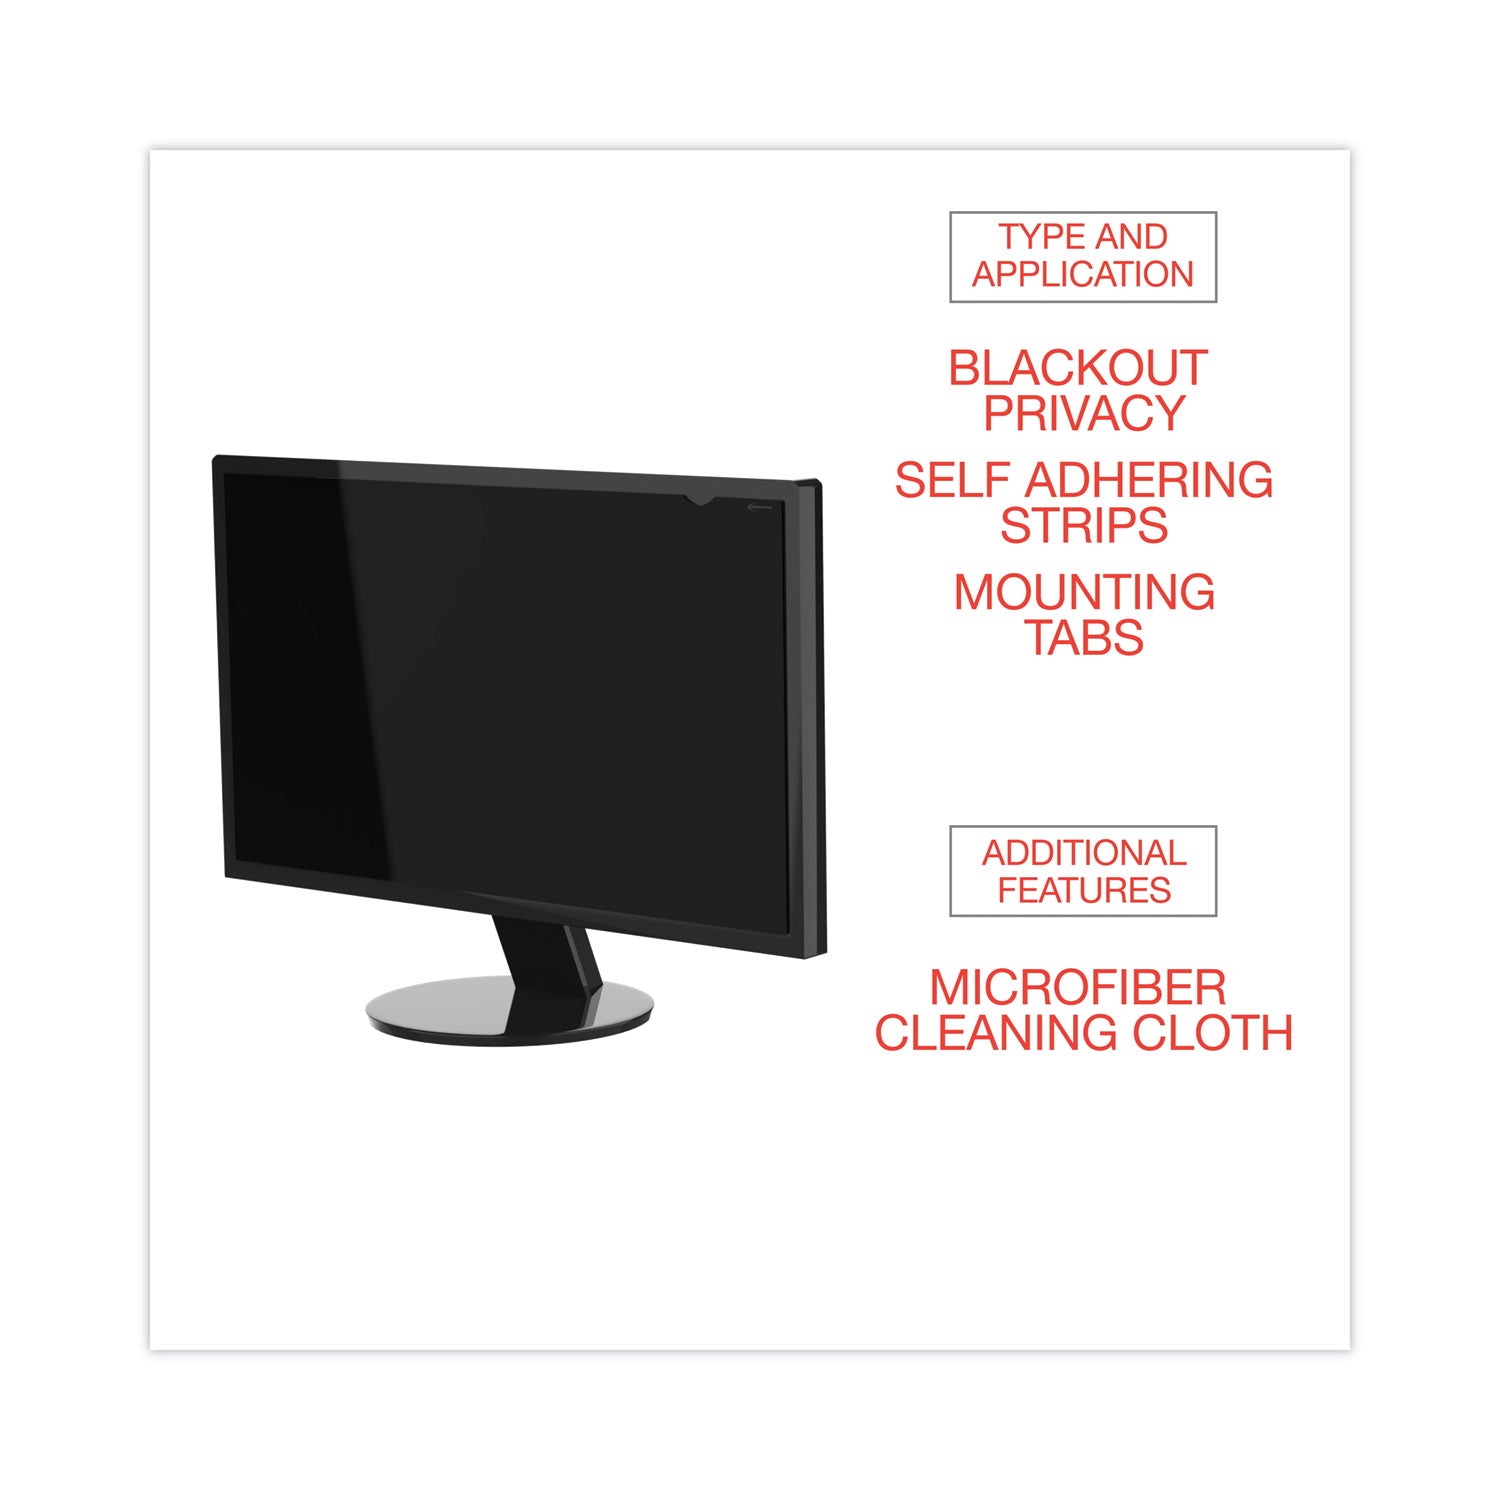 blackout-privacy-monitor-filter-for-238-widescreen-flat-panel-monitor-169-aspect-ratio_ivrblf238w - 5